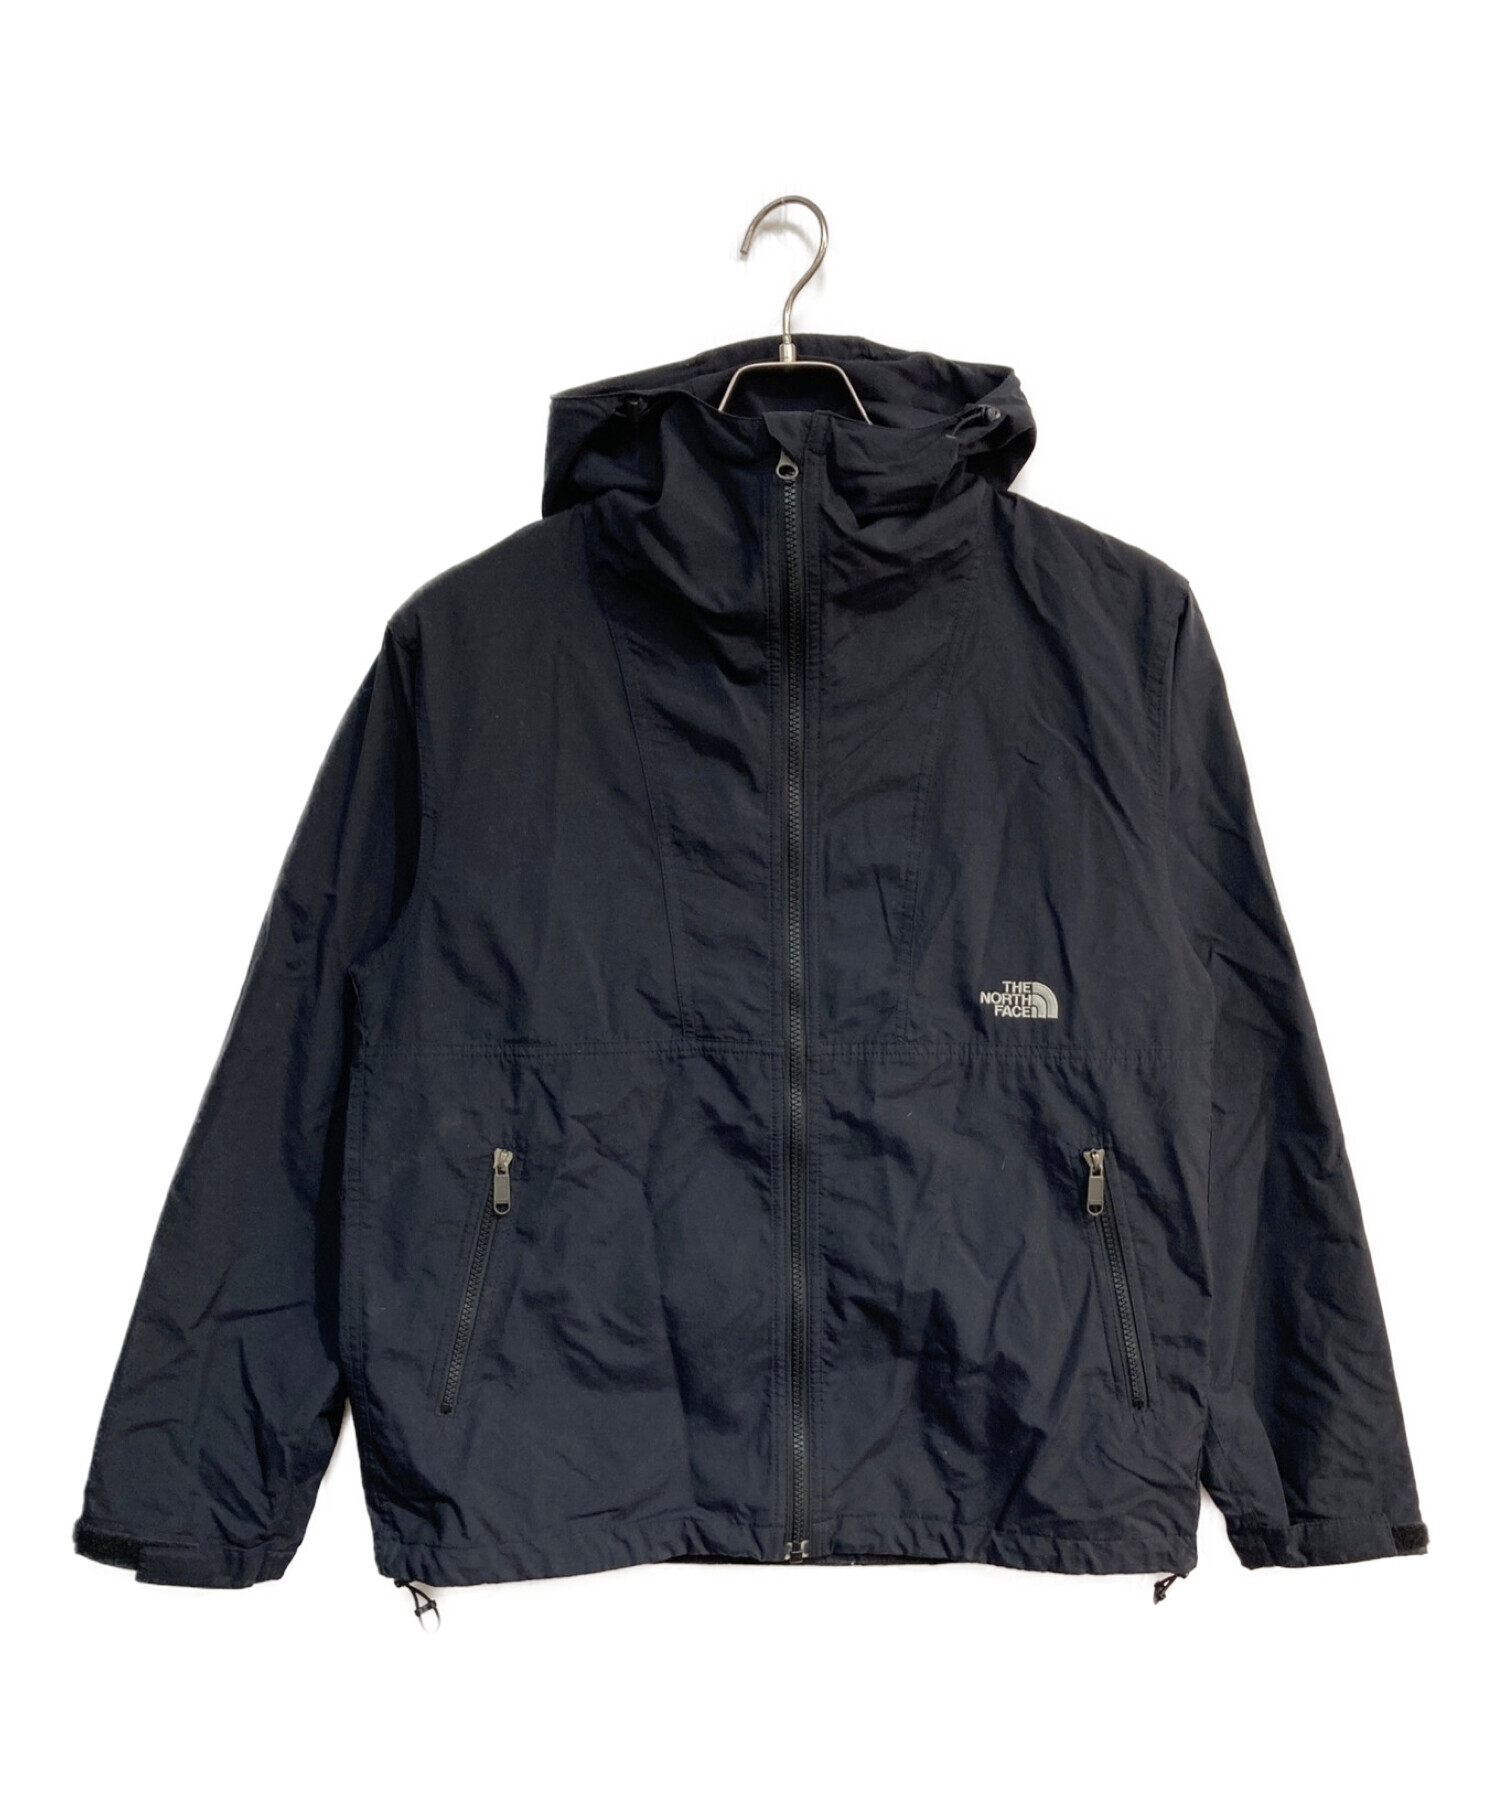 THE NORTH FACE マウンテン コンパクトジャケット NP21230